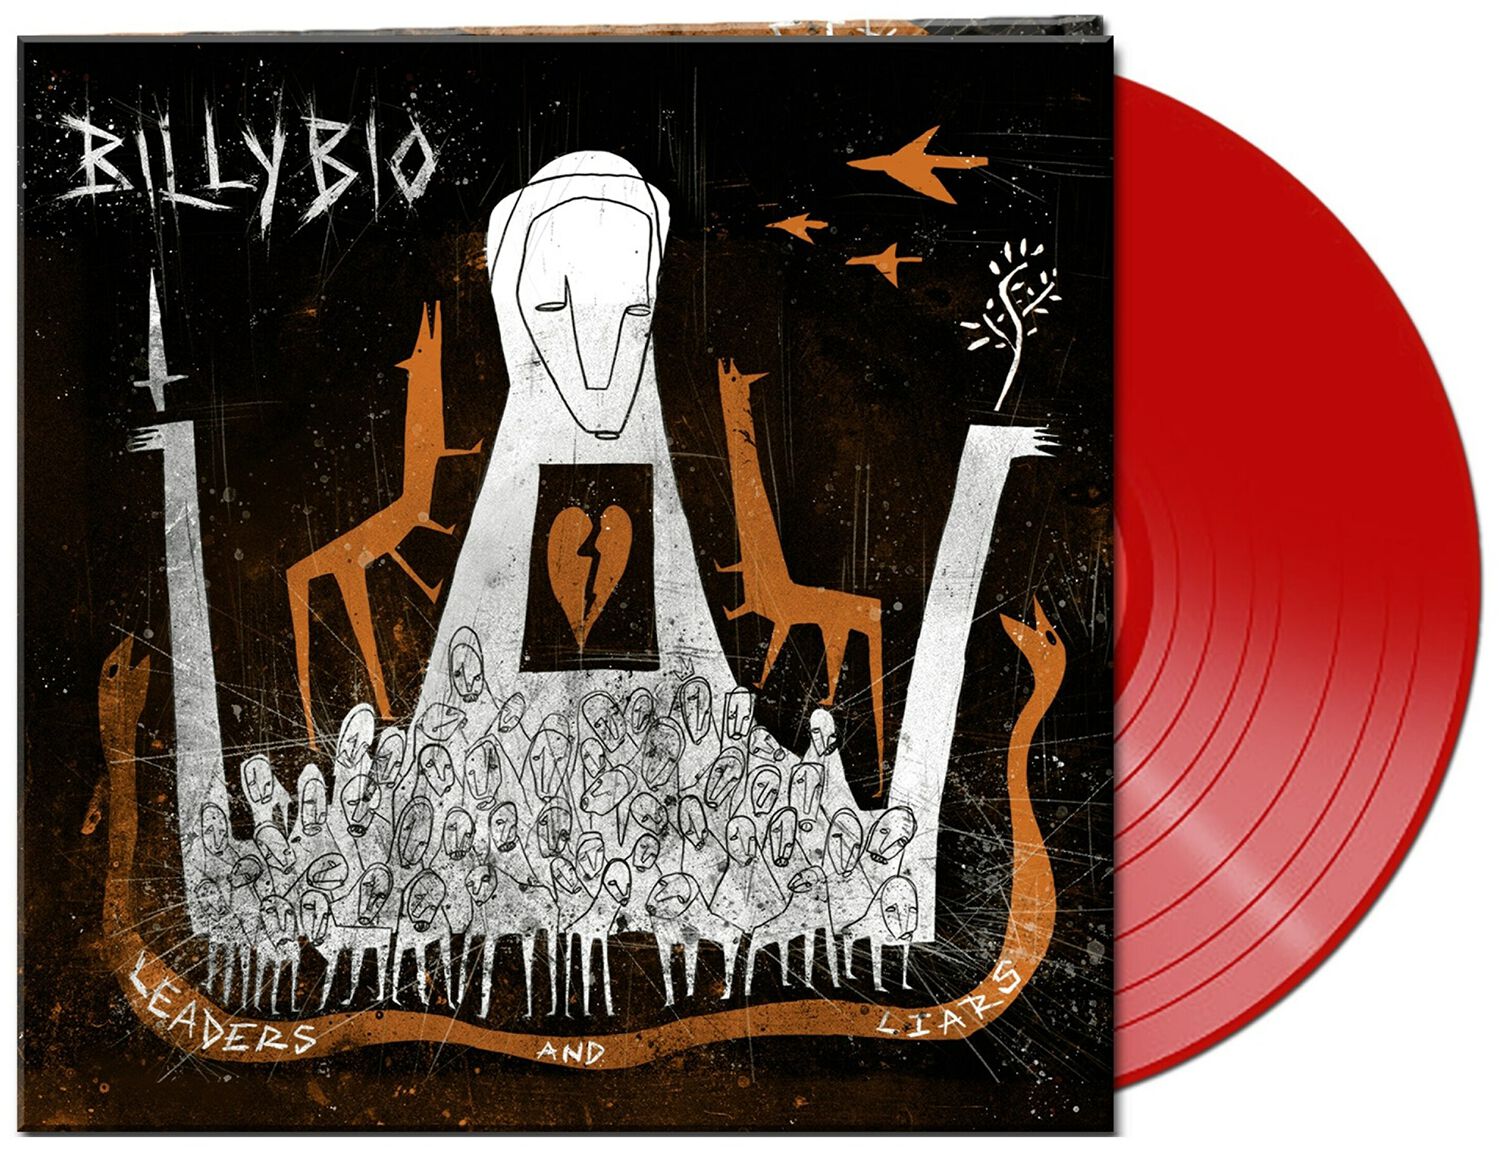 Billybio Leaders and liars LP rot